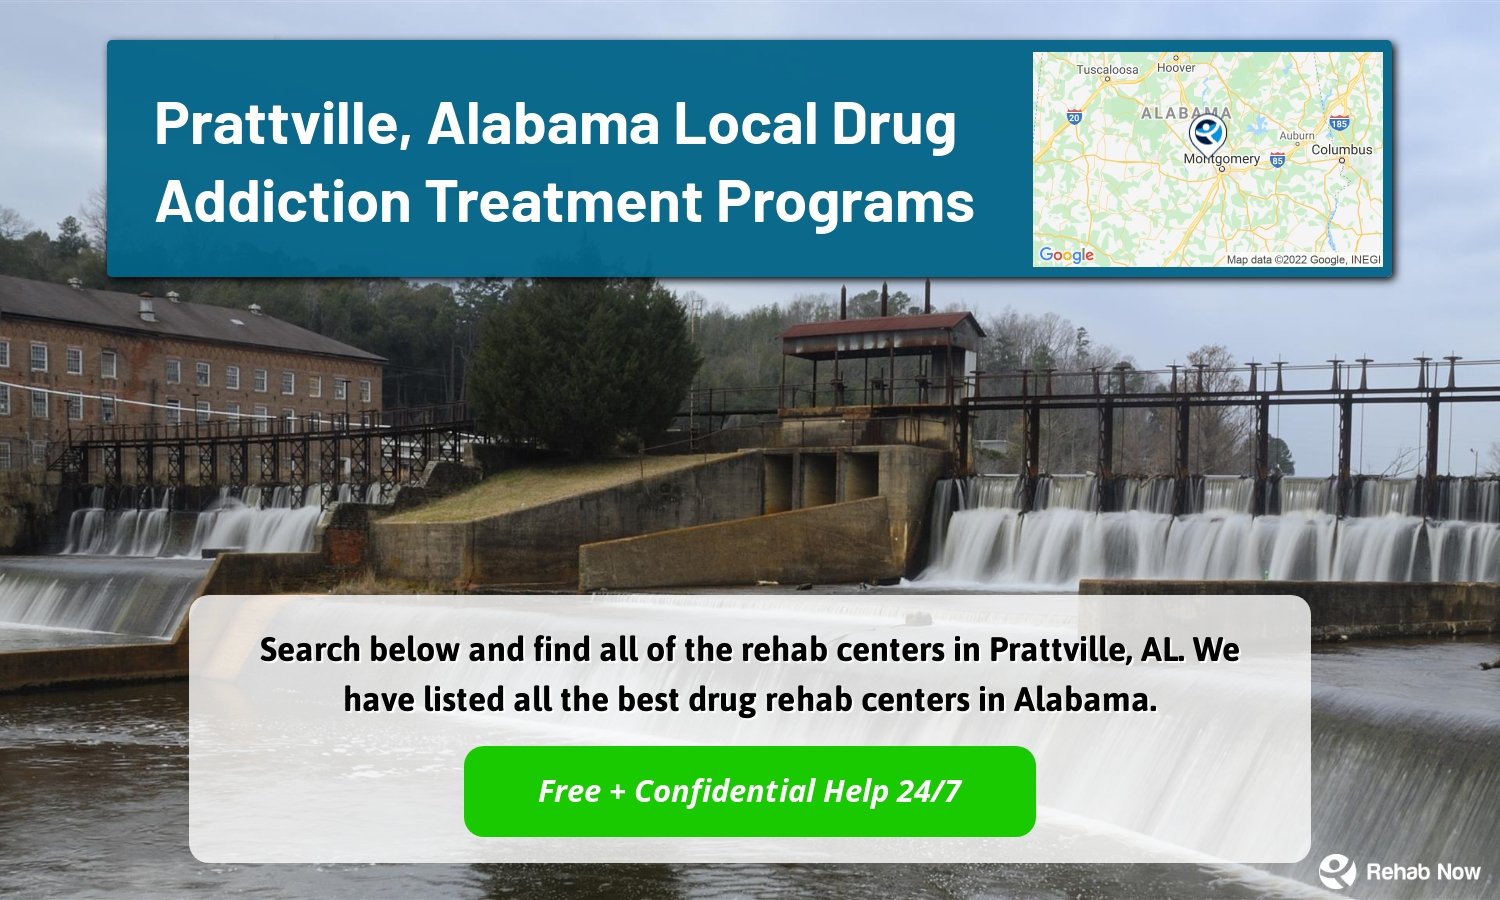 Search below and find all of the rehab centers in Prattville, AL. We have listed all the best drug rehab centers in Alabama.